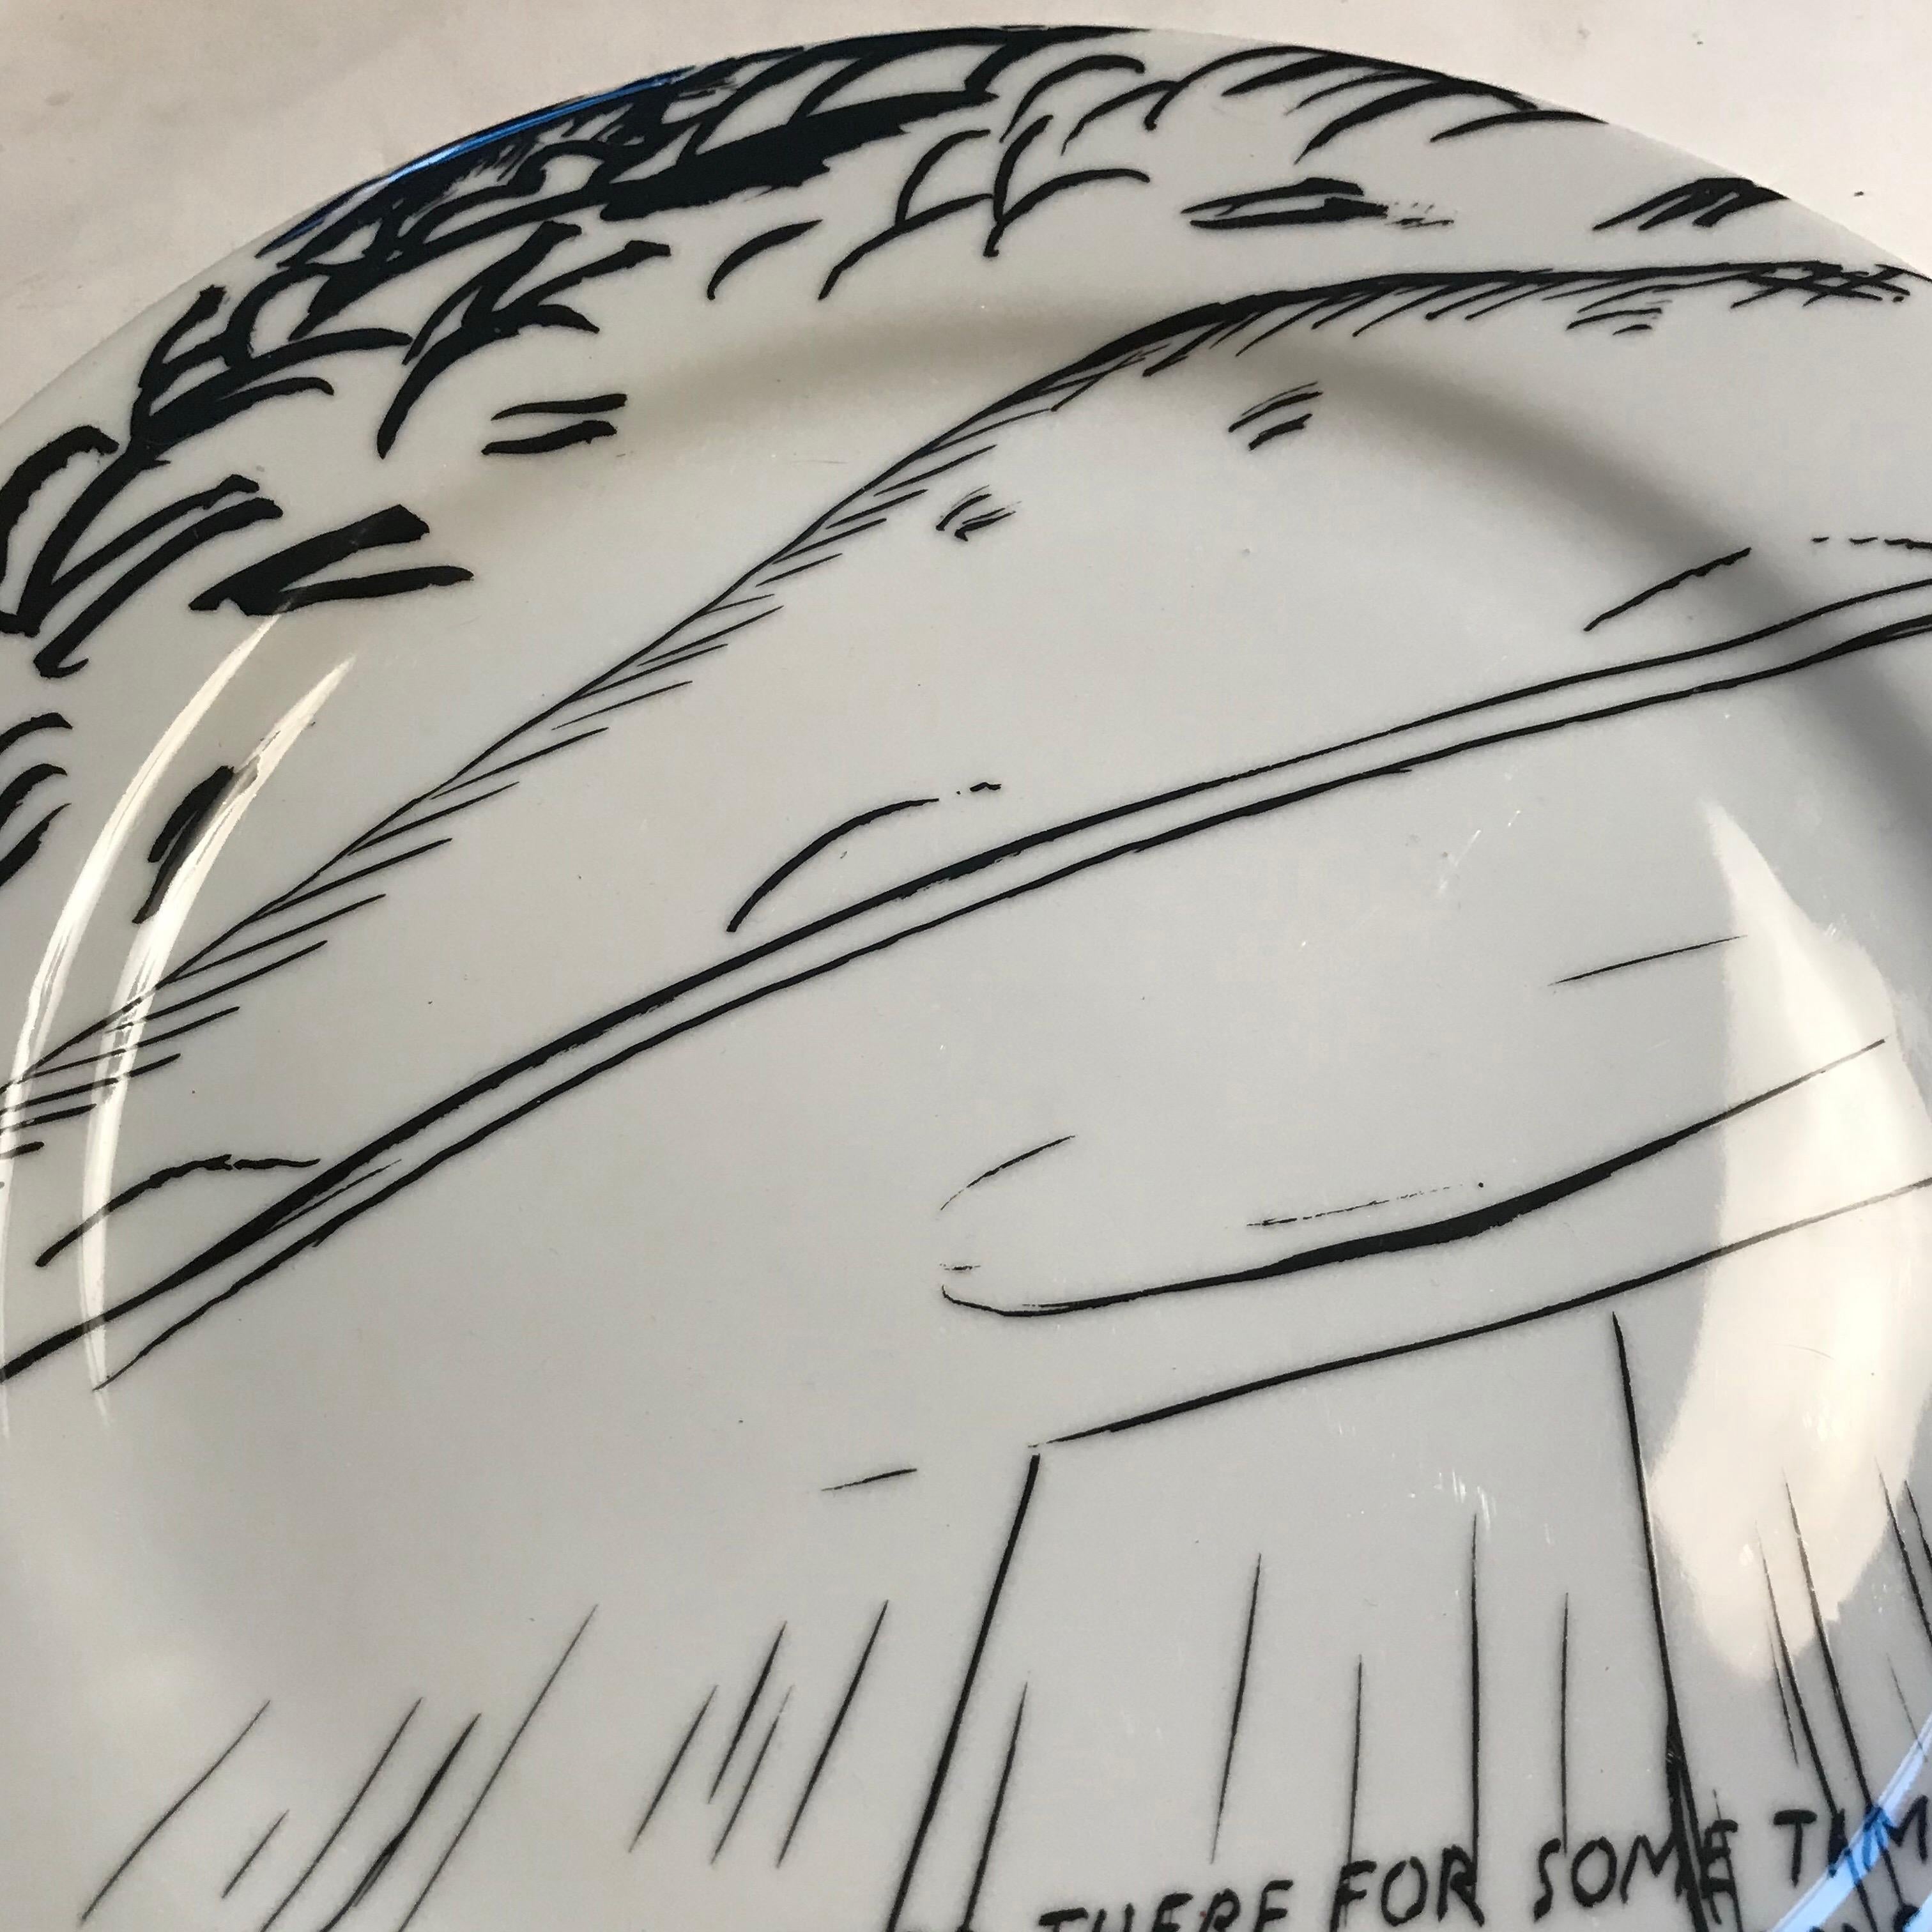 Ceramic plate designed by artist Raymond Pettibon. Produced on the occasion of the Santa Monica Museum of Art’s 20th anniversary. Edition of 125 Plate signed, numbered and stamped with artist signature and SMMOA 20th anniversary stamp to the